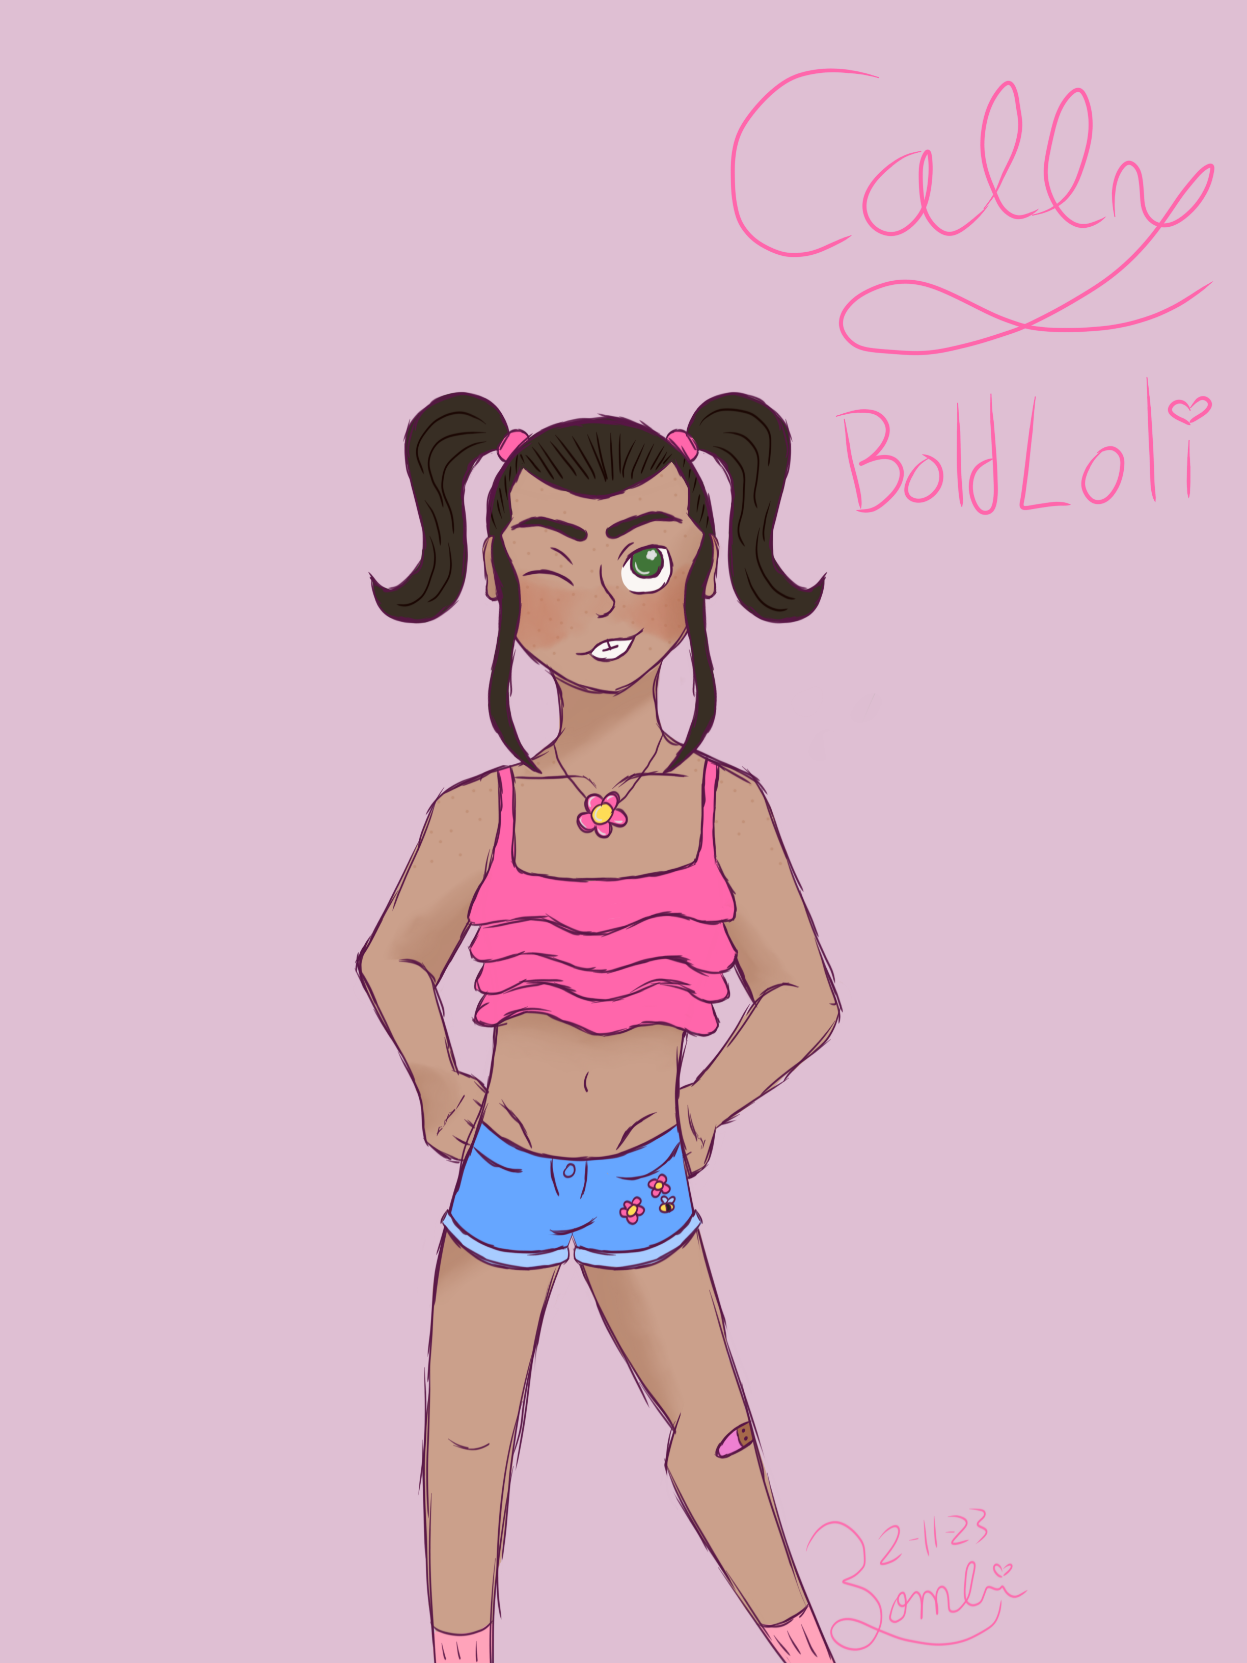 A picture of Cally, Freak4Freak's Lolicon love interest.